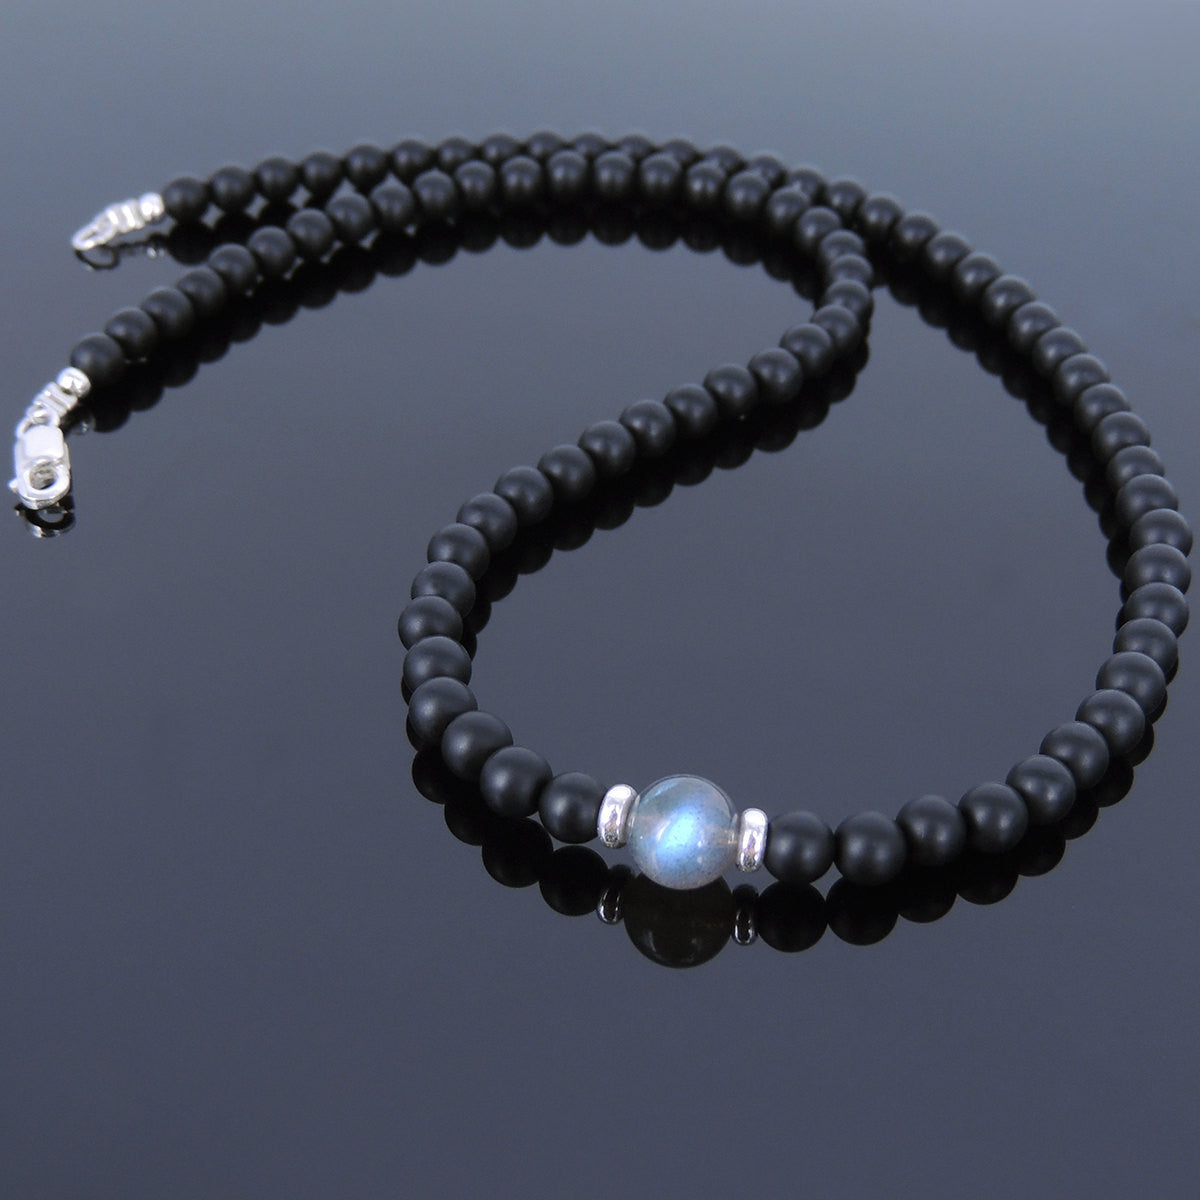 Labradorite & Matte Black Onyx Healing Gemstone Necklace with S925 Sterling Silver Spacer Beads & Clasp - Handmade by Gem & Silver NK033